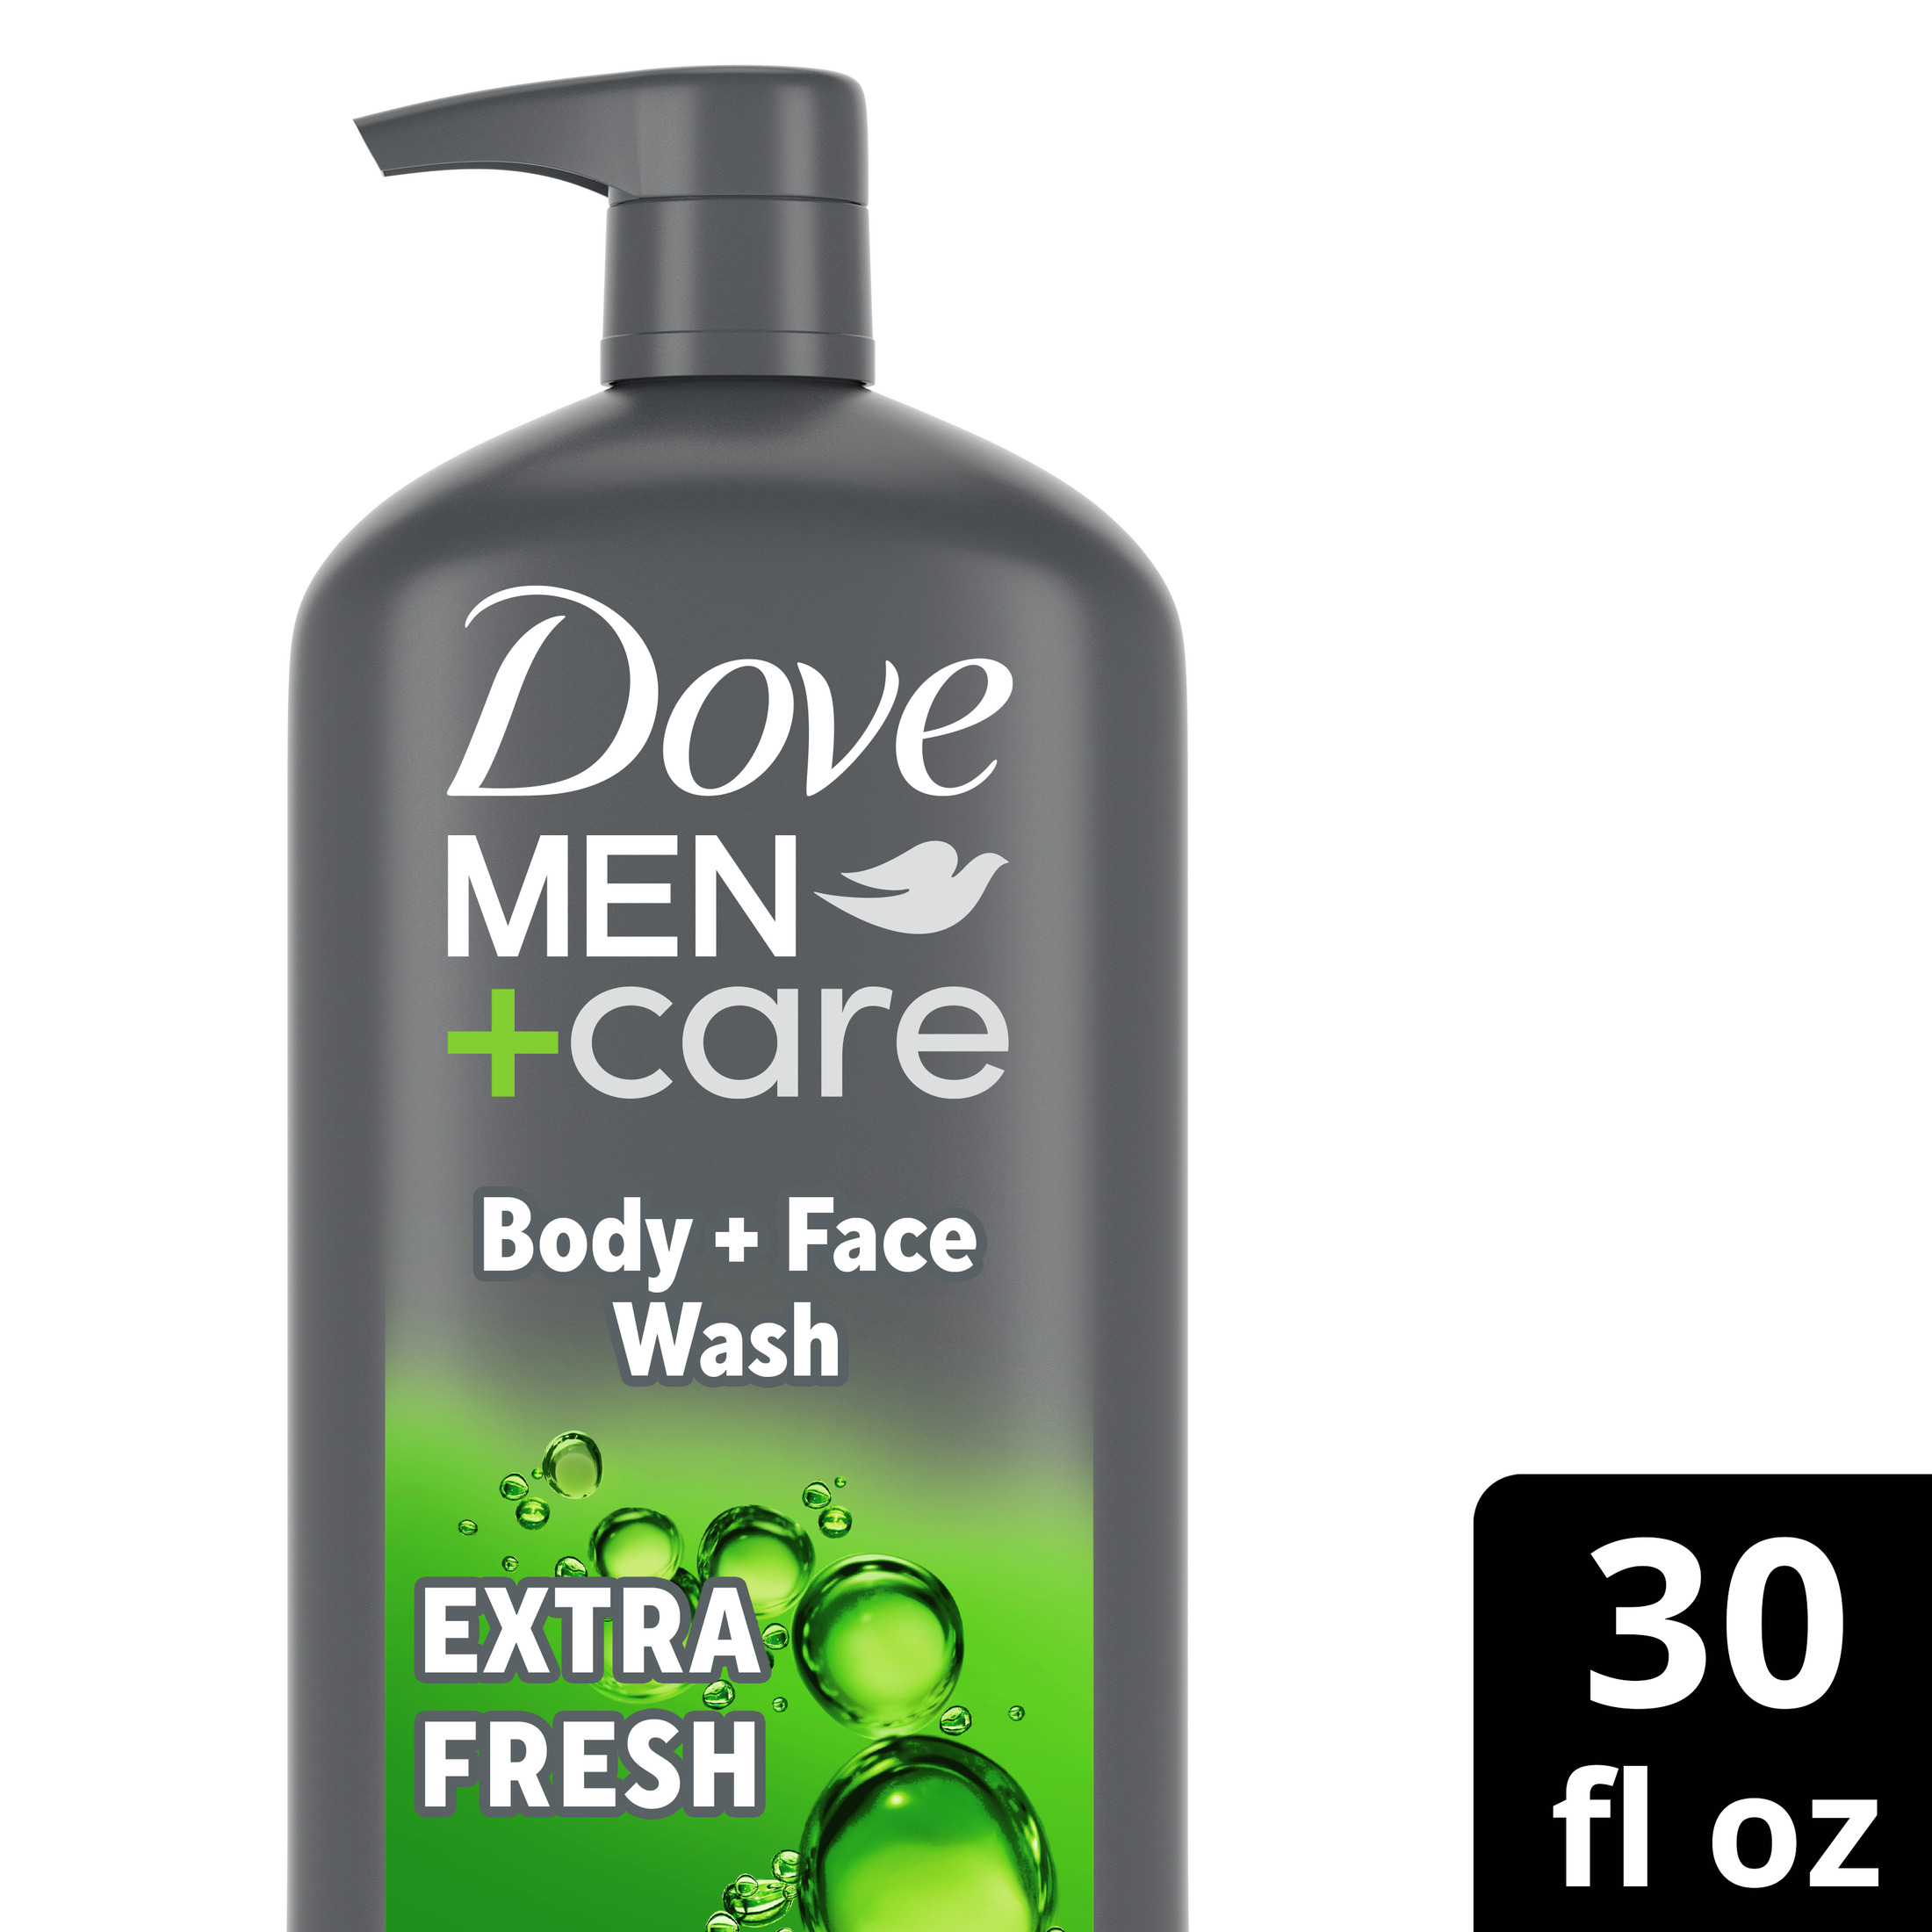 Dove Men+Care Extra Fresh Refreshing Hydrating Men's Face & Body Wash All Skin, 30 oz - image 3 of 11